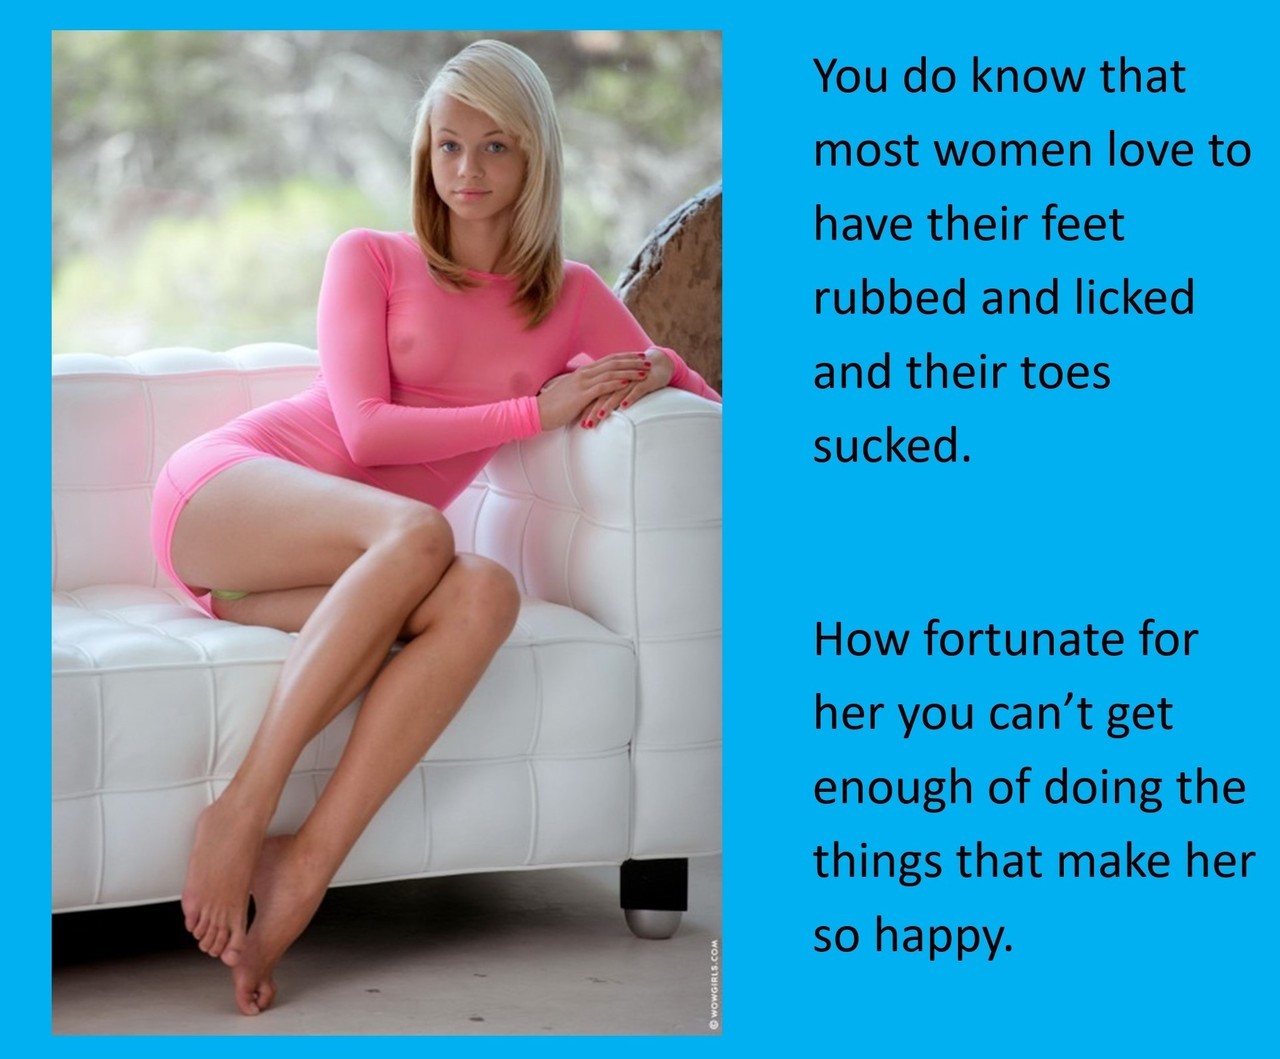 You do know that most women love to have their feet rubbed and licked and their toes